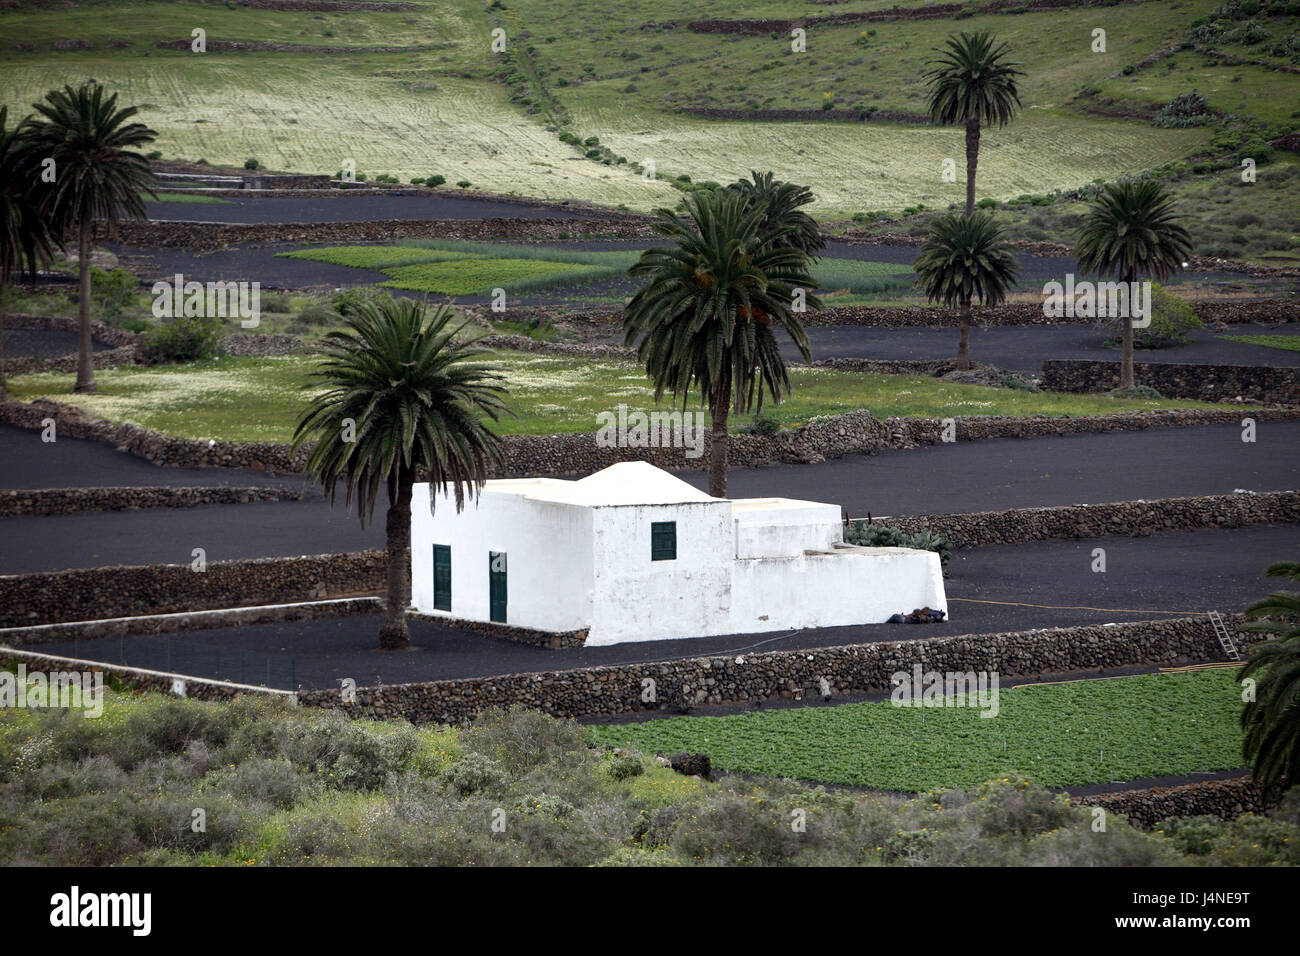 Spain, Lanzarote, Haria, fields, defensive walls, house, palms, Stock Photo